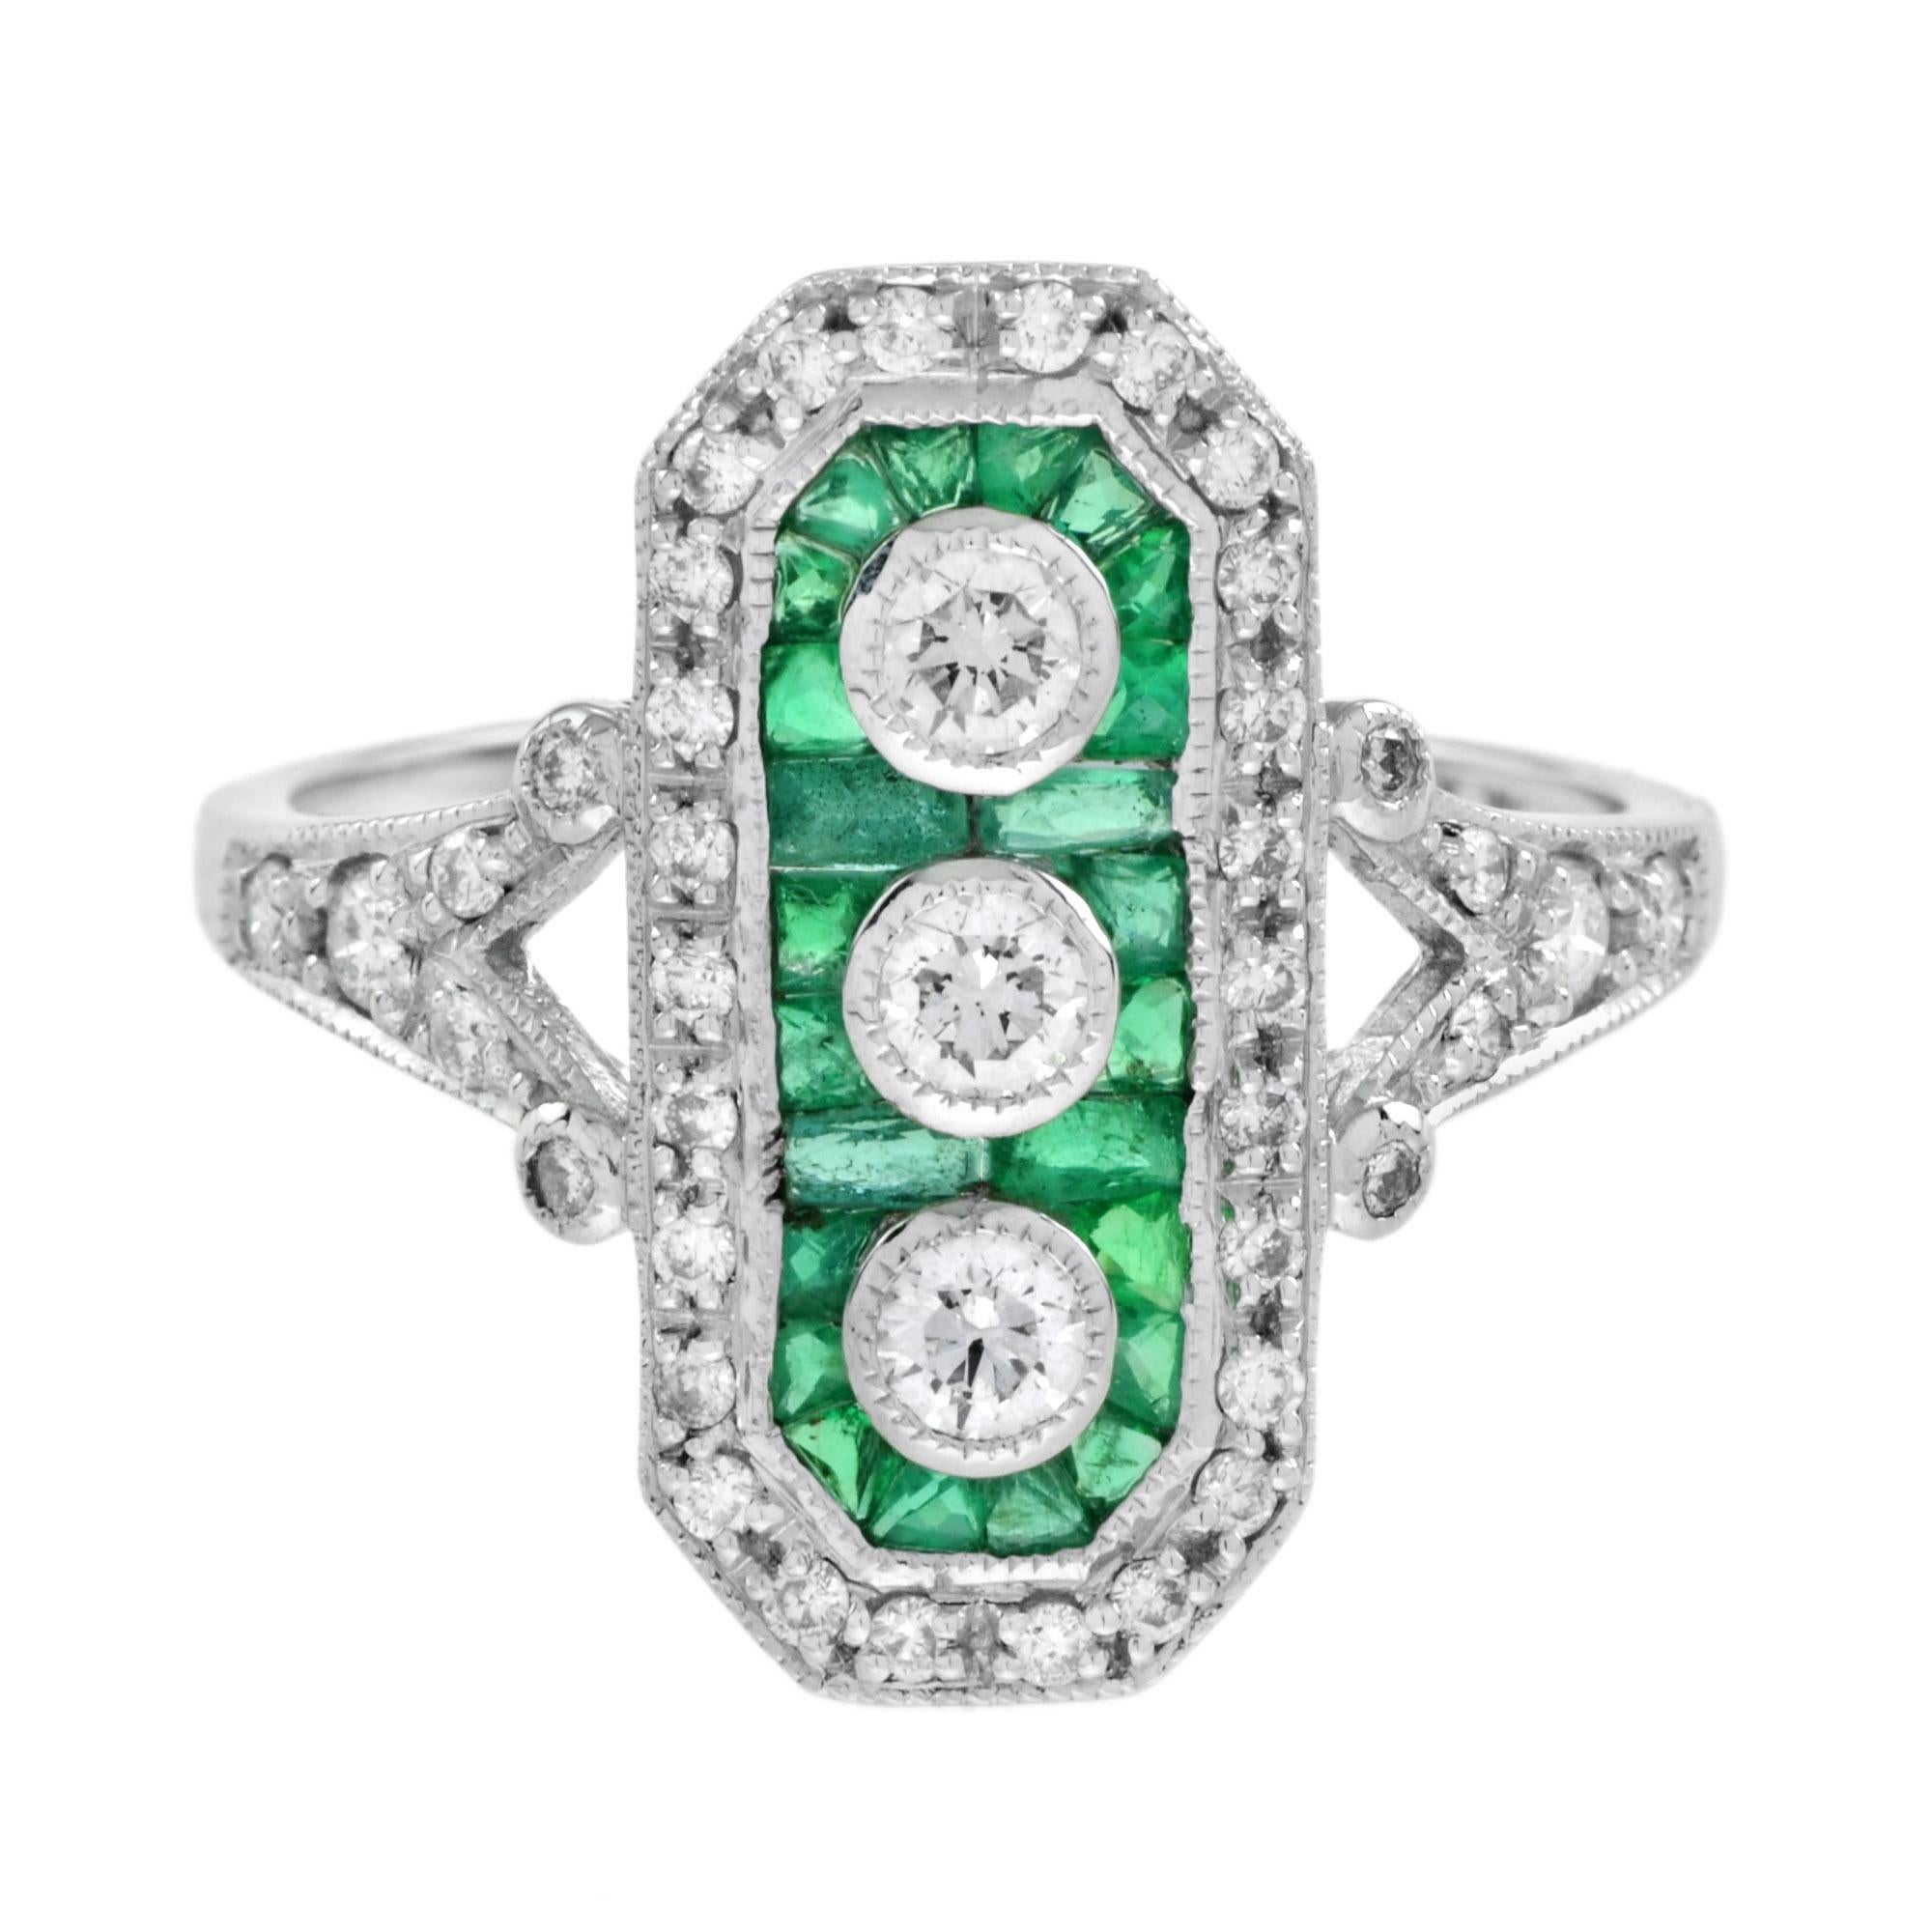 A seamless vertical flash of sparkle is created by three round cut central diamonds – in this superlative and utterly impressive Art Deco style dinner ring. The scintillating trio are outline by emerald and diamond octagonal frame which leads to